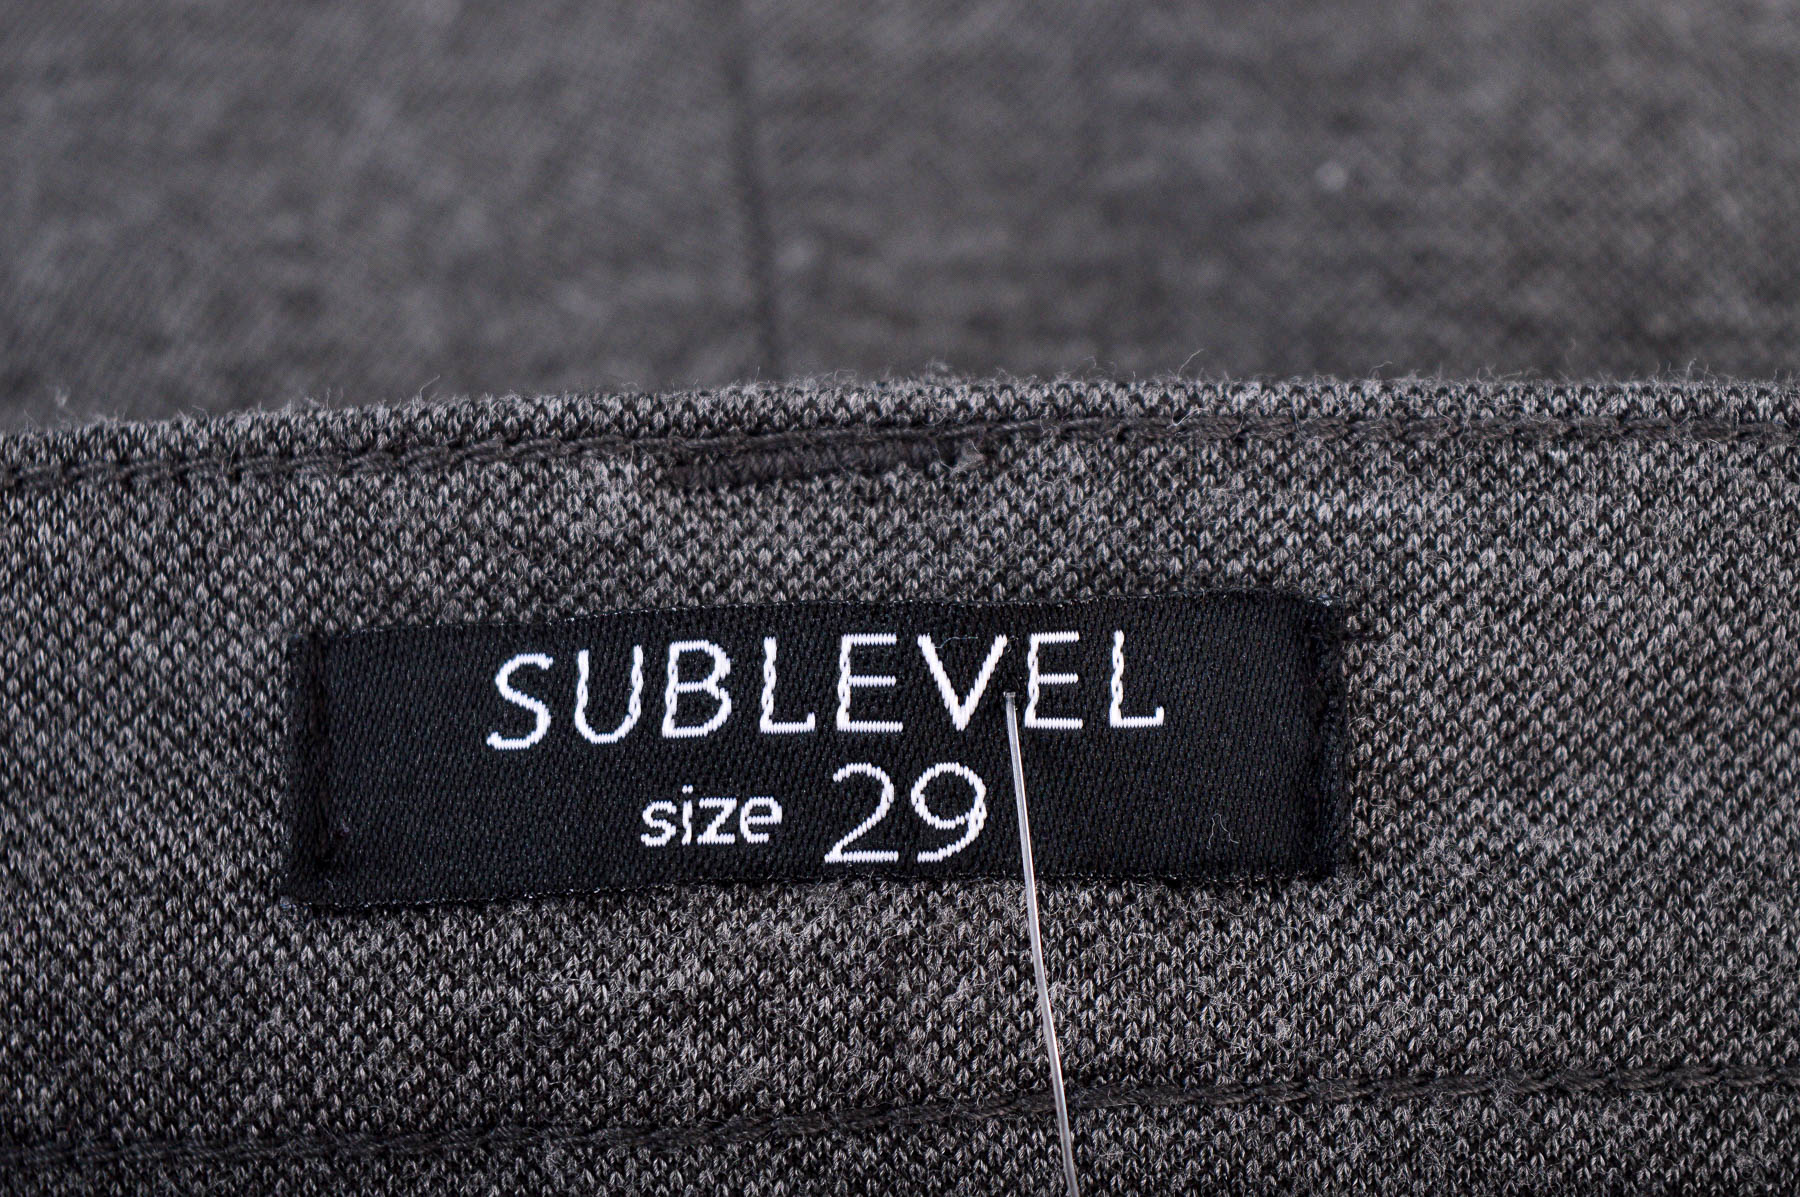 Men's trousers - SUBLEVEL - 2